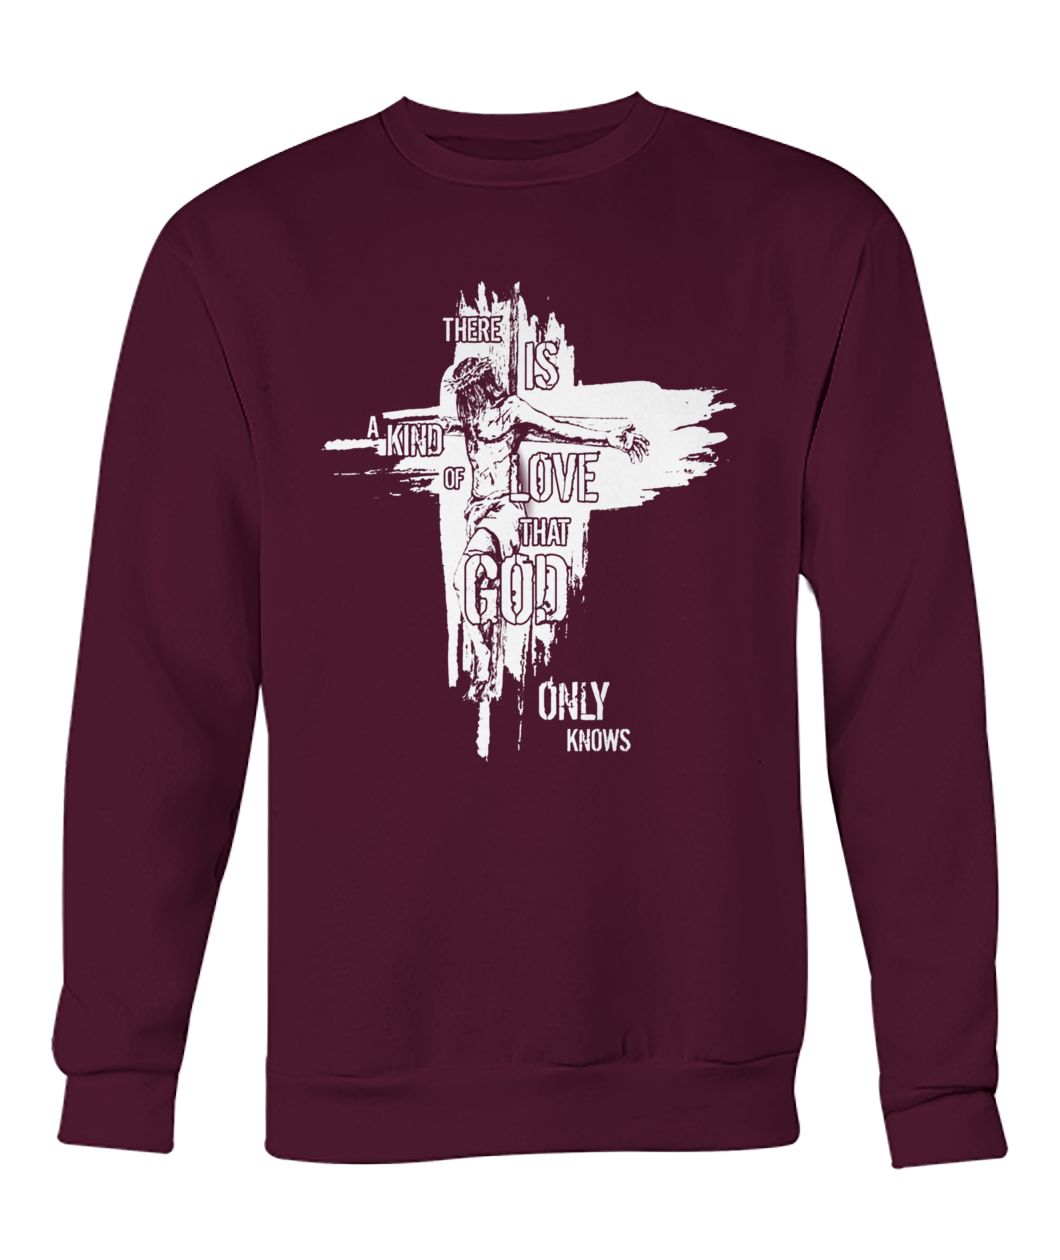 There is a kind of love that god only knows faith cross crew neck sweatshirt